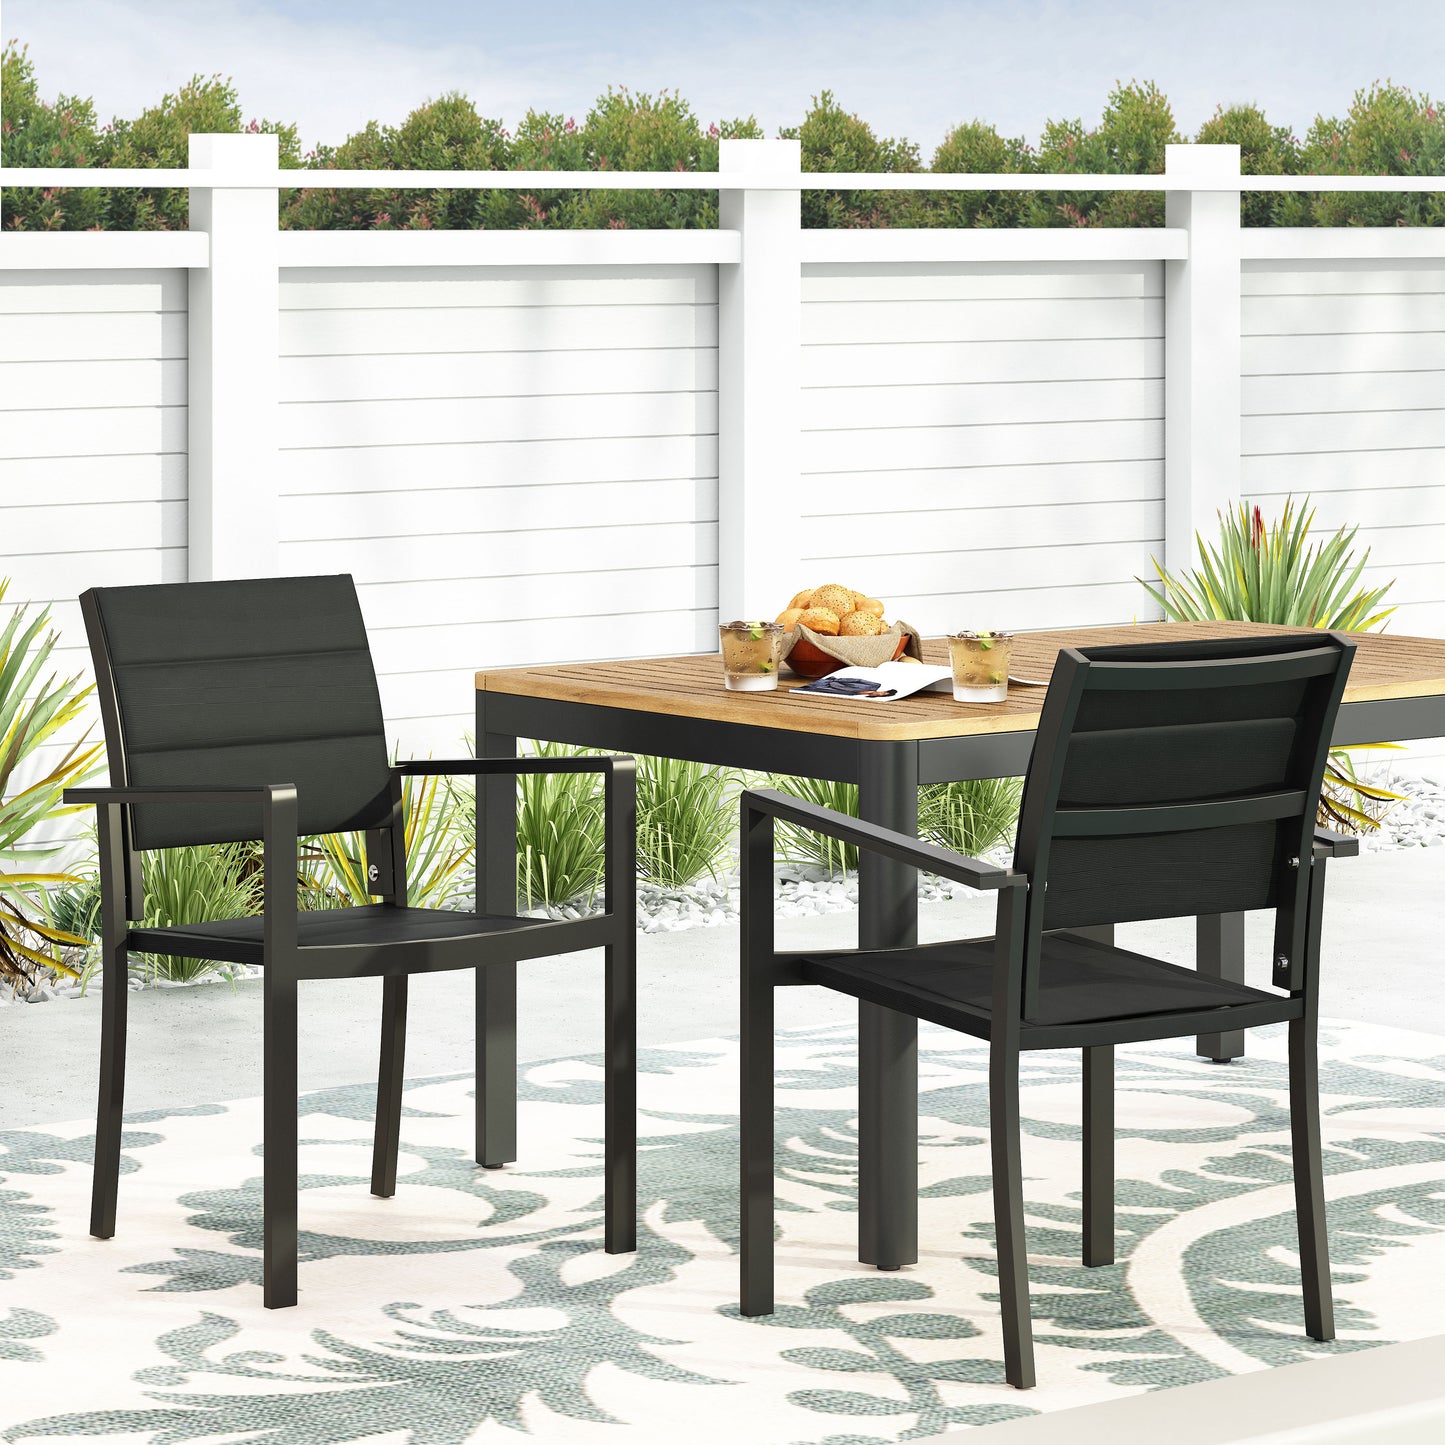 Curtisian Outdoor Mesh and Aluminum Dining Chairs